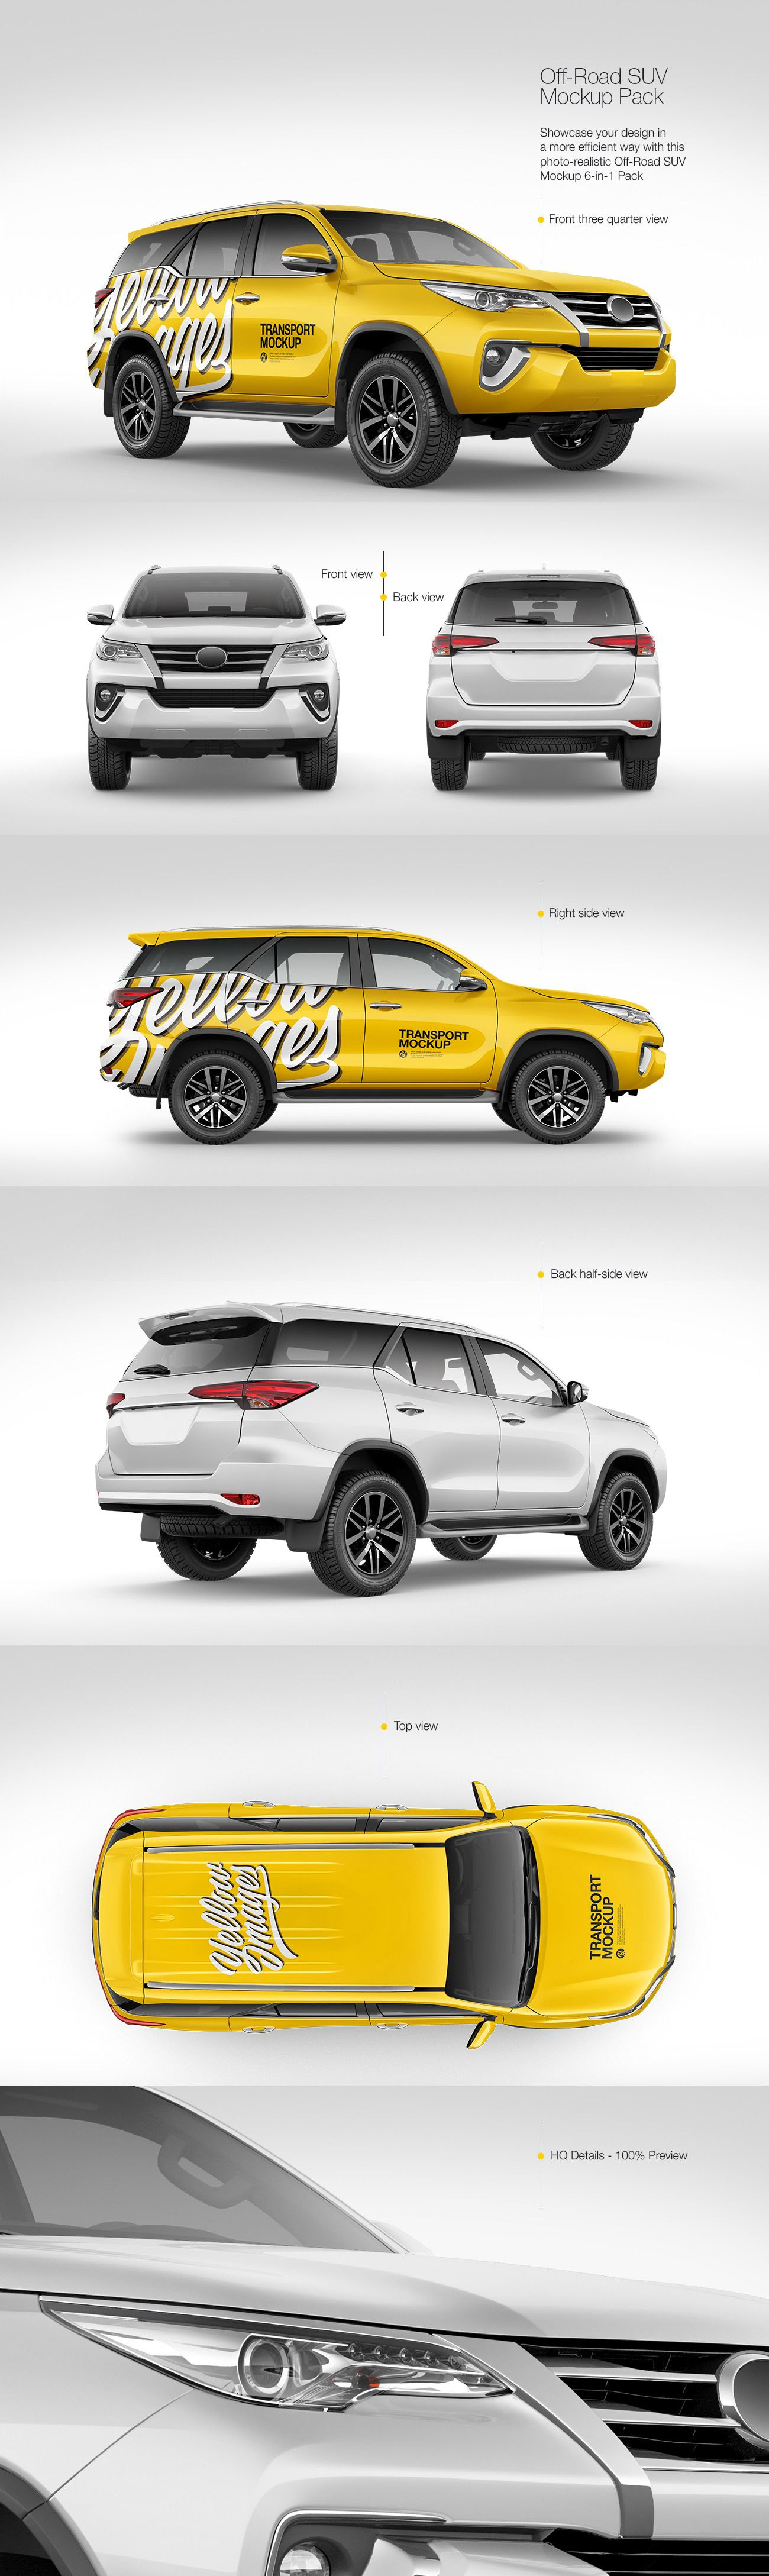 OffRoad SUV Mockup Pack in Handpicked Sets of Vehicles on Yellow